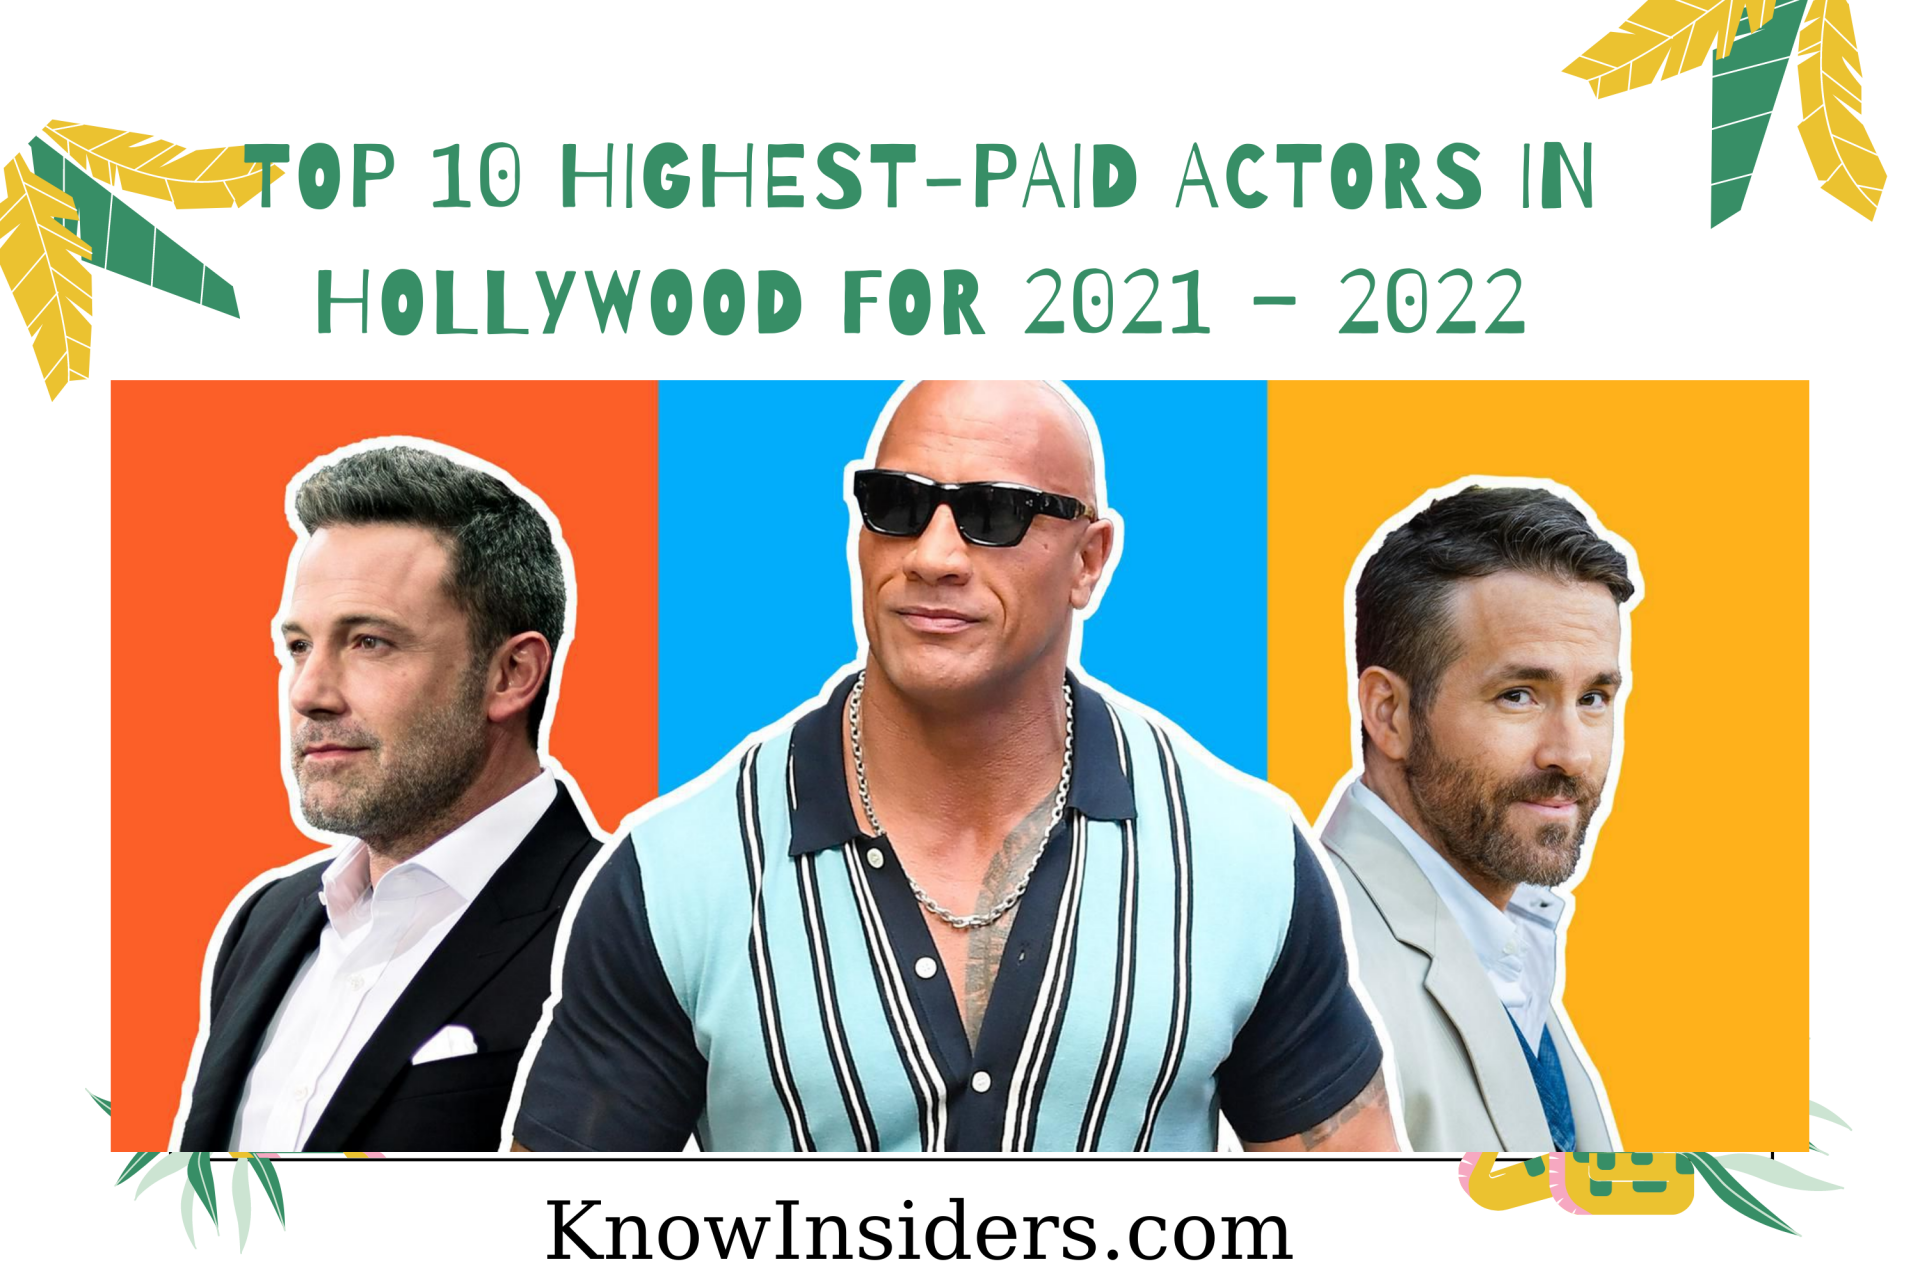 Top 10 Highest-Paid Actors in Hollywood 2022